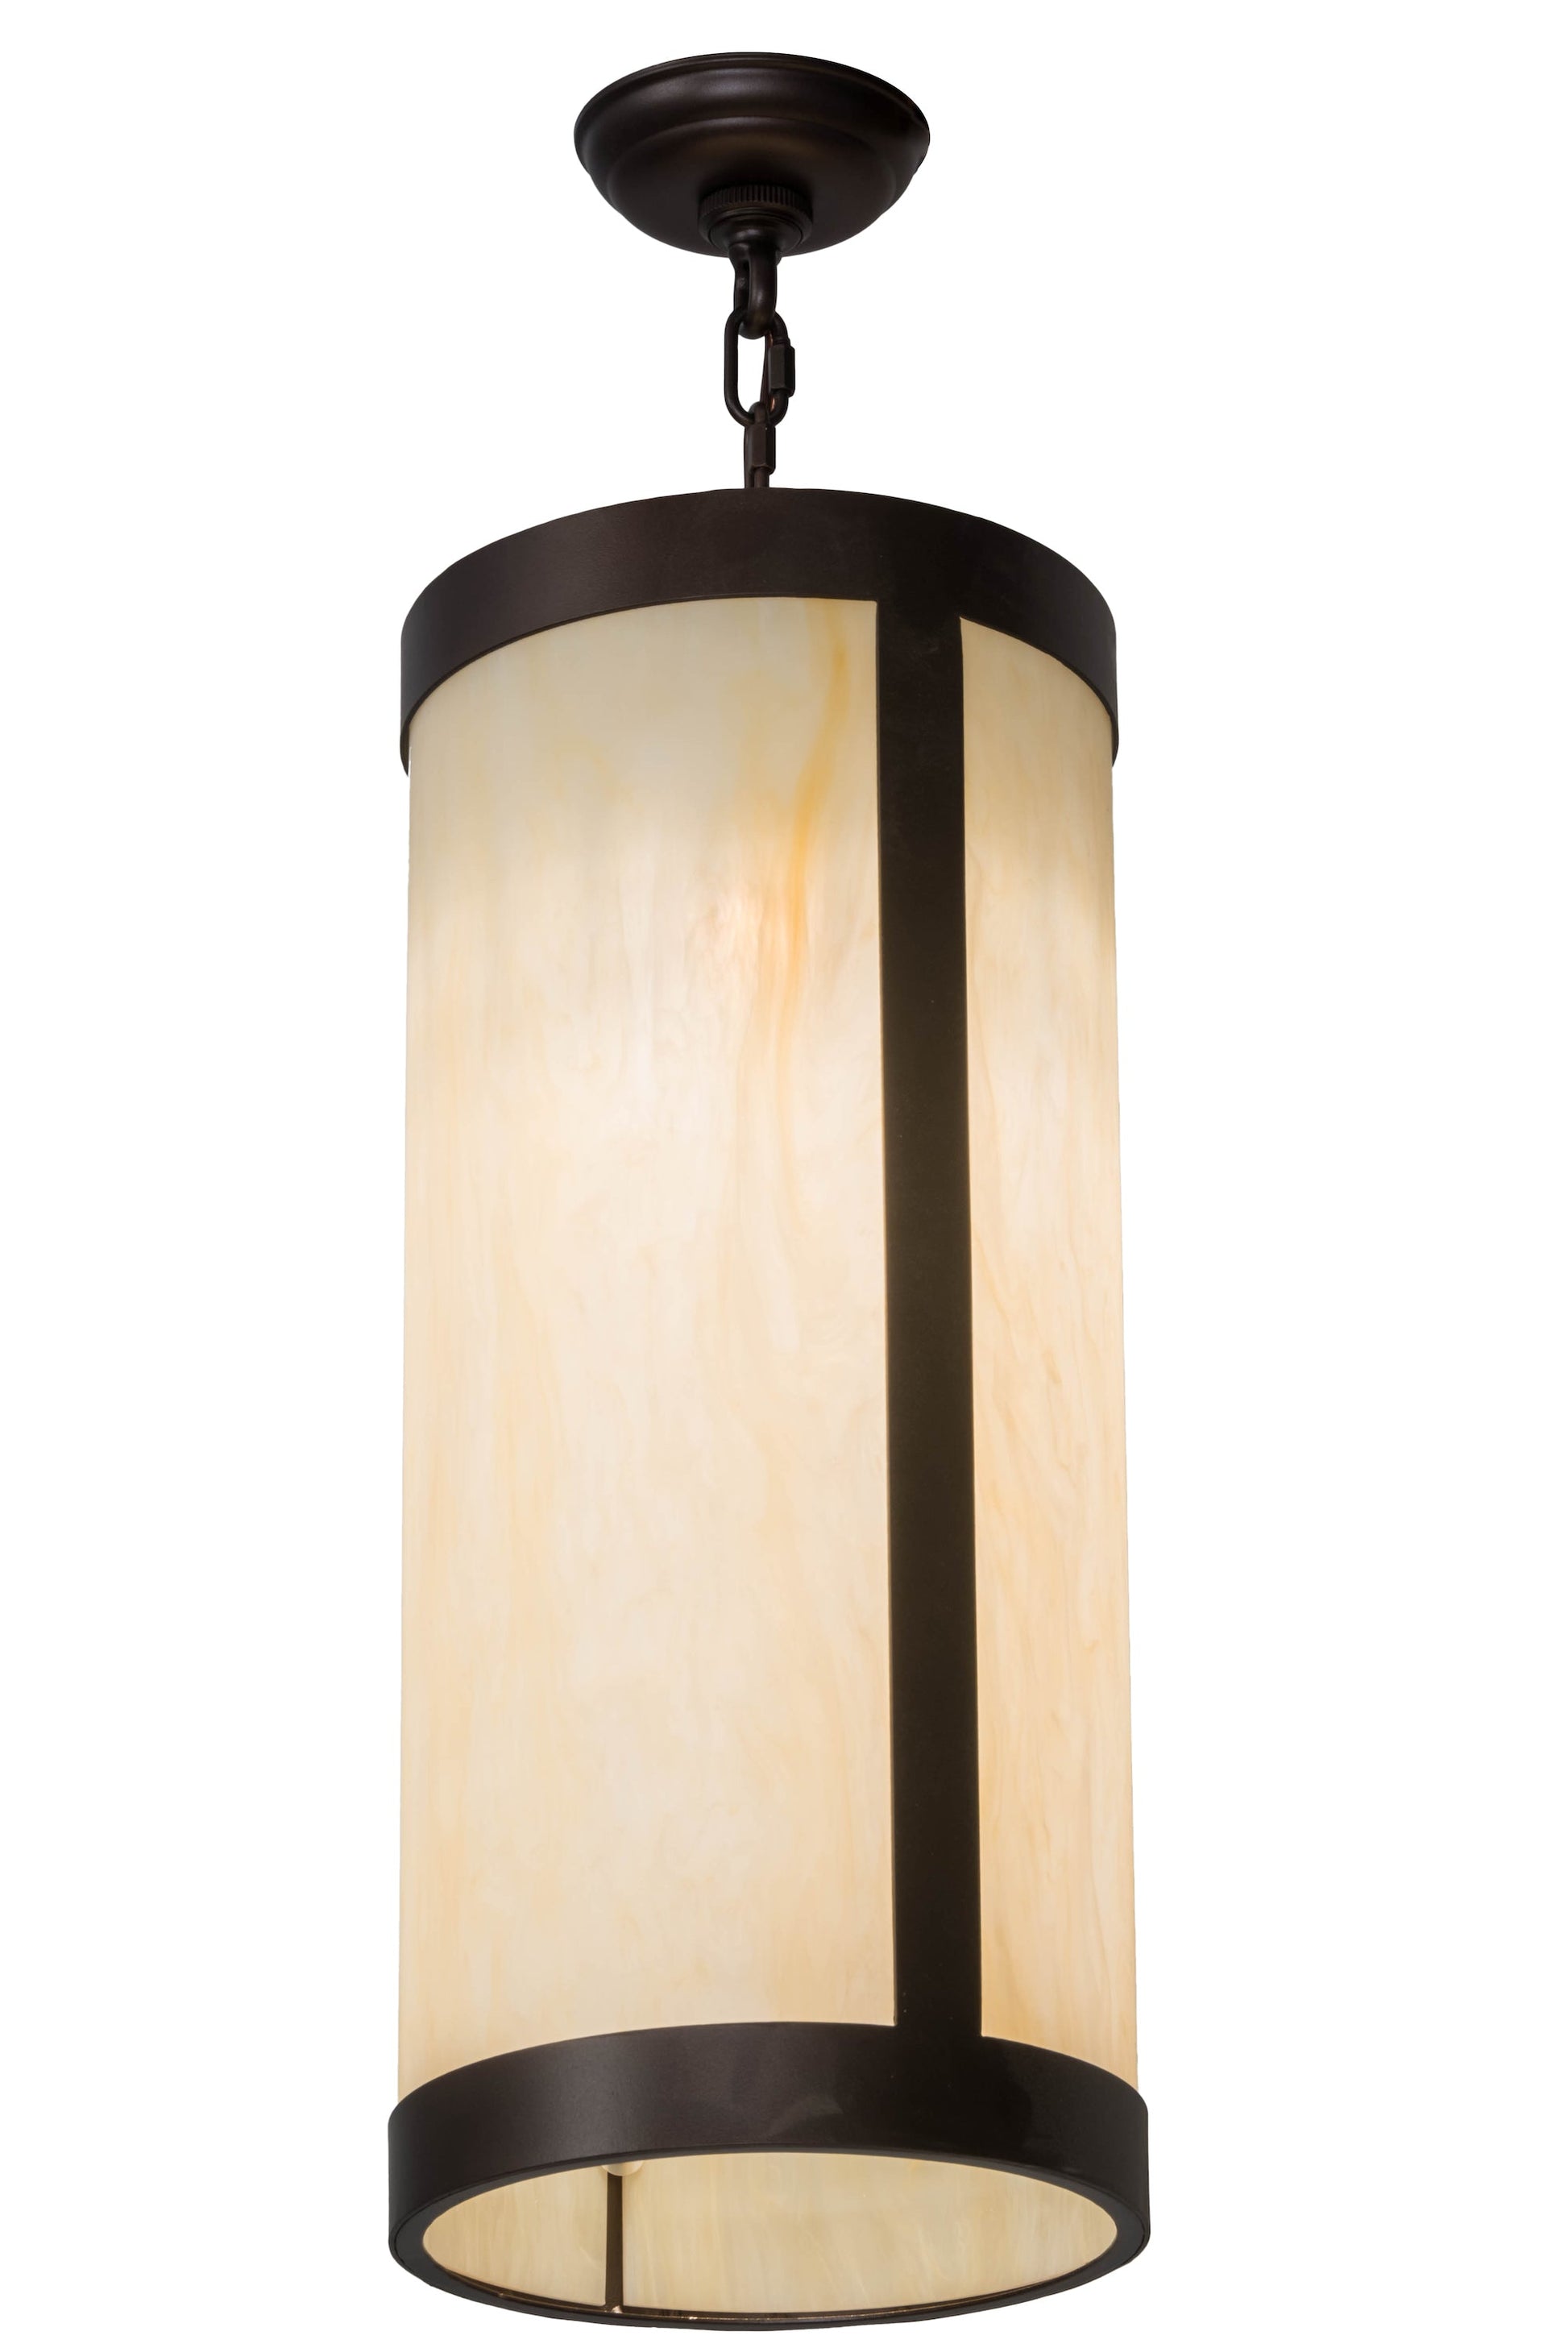 10" Cartier Pendant by 2nd Ave Lighting